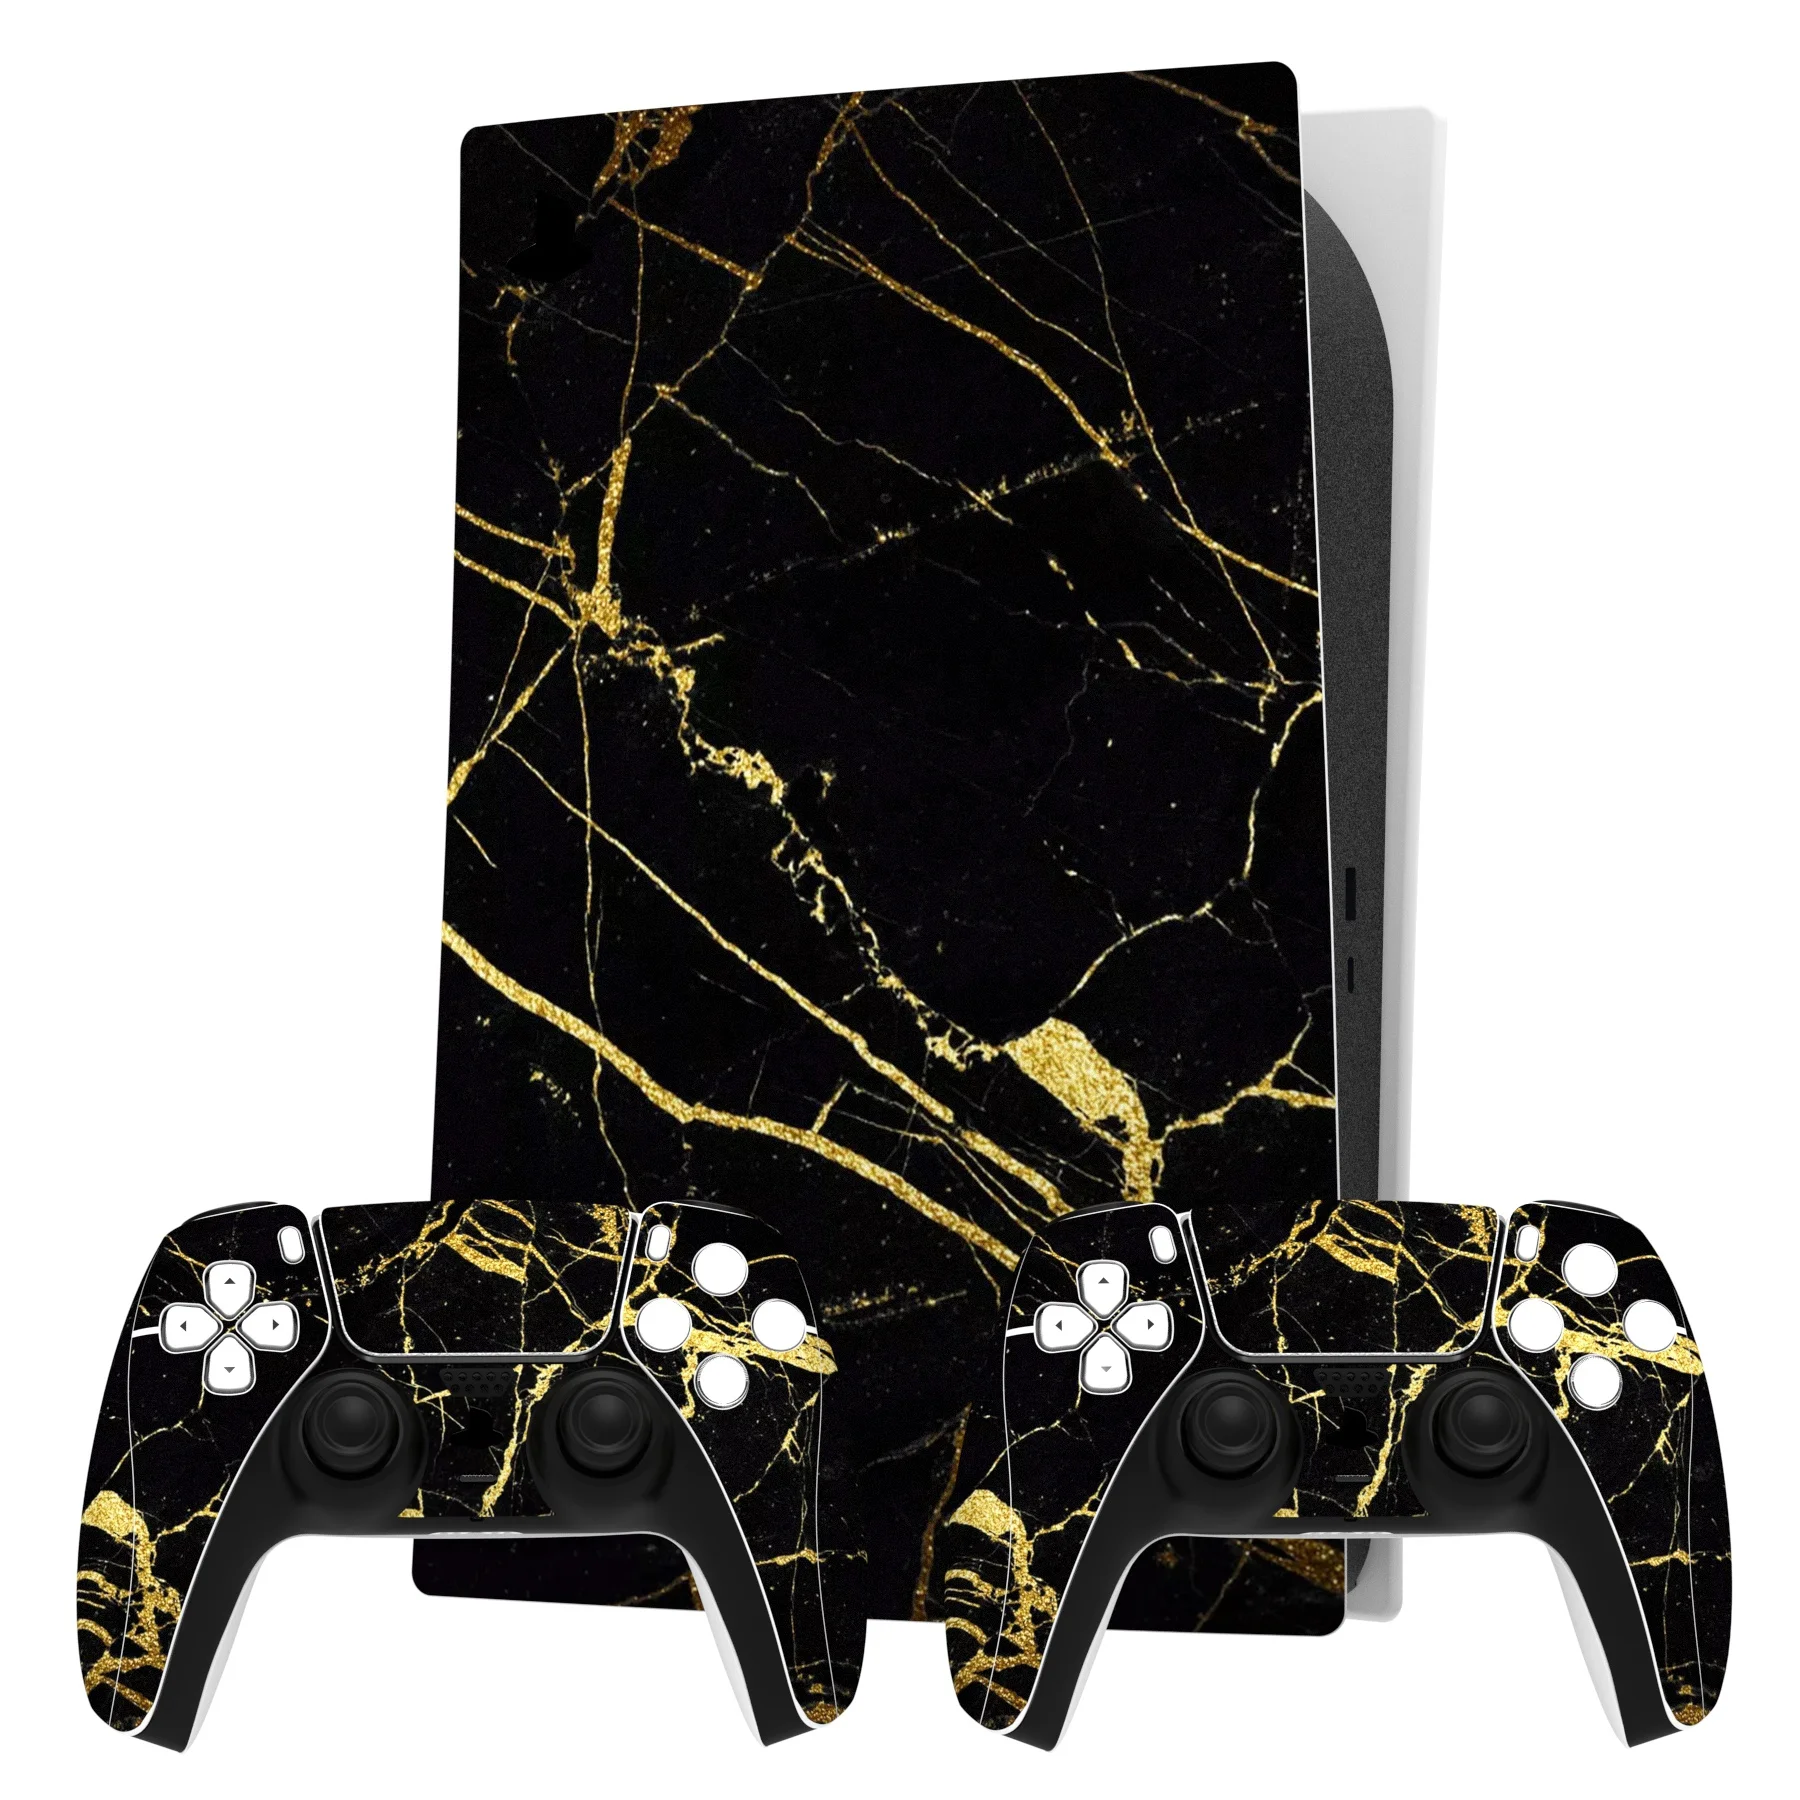 

PS5 Accessories Custom Vinyl Decal Skin Stickers Cover for Sony PS5 Playstation 5 PS5 Console Controllers Gamepad